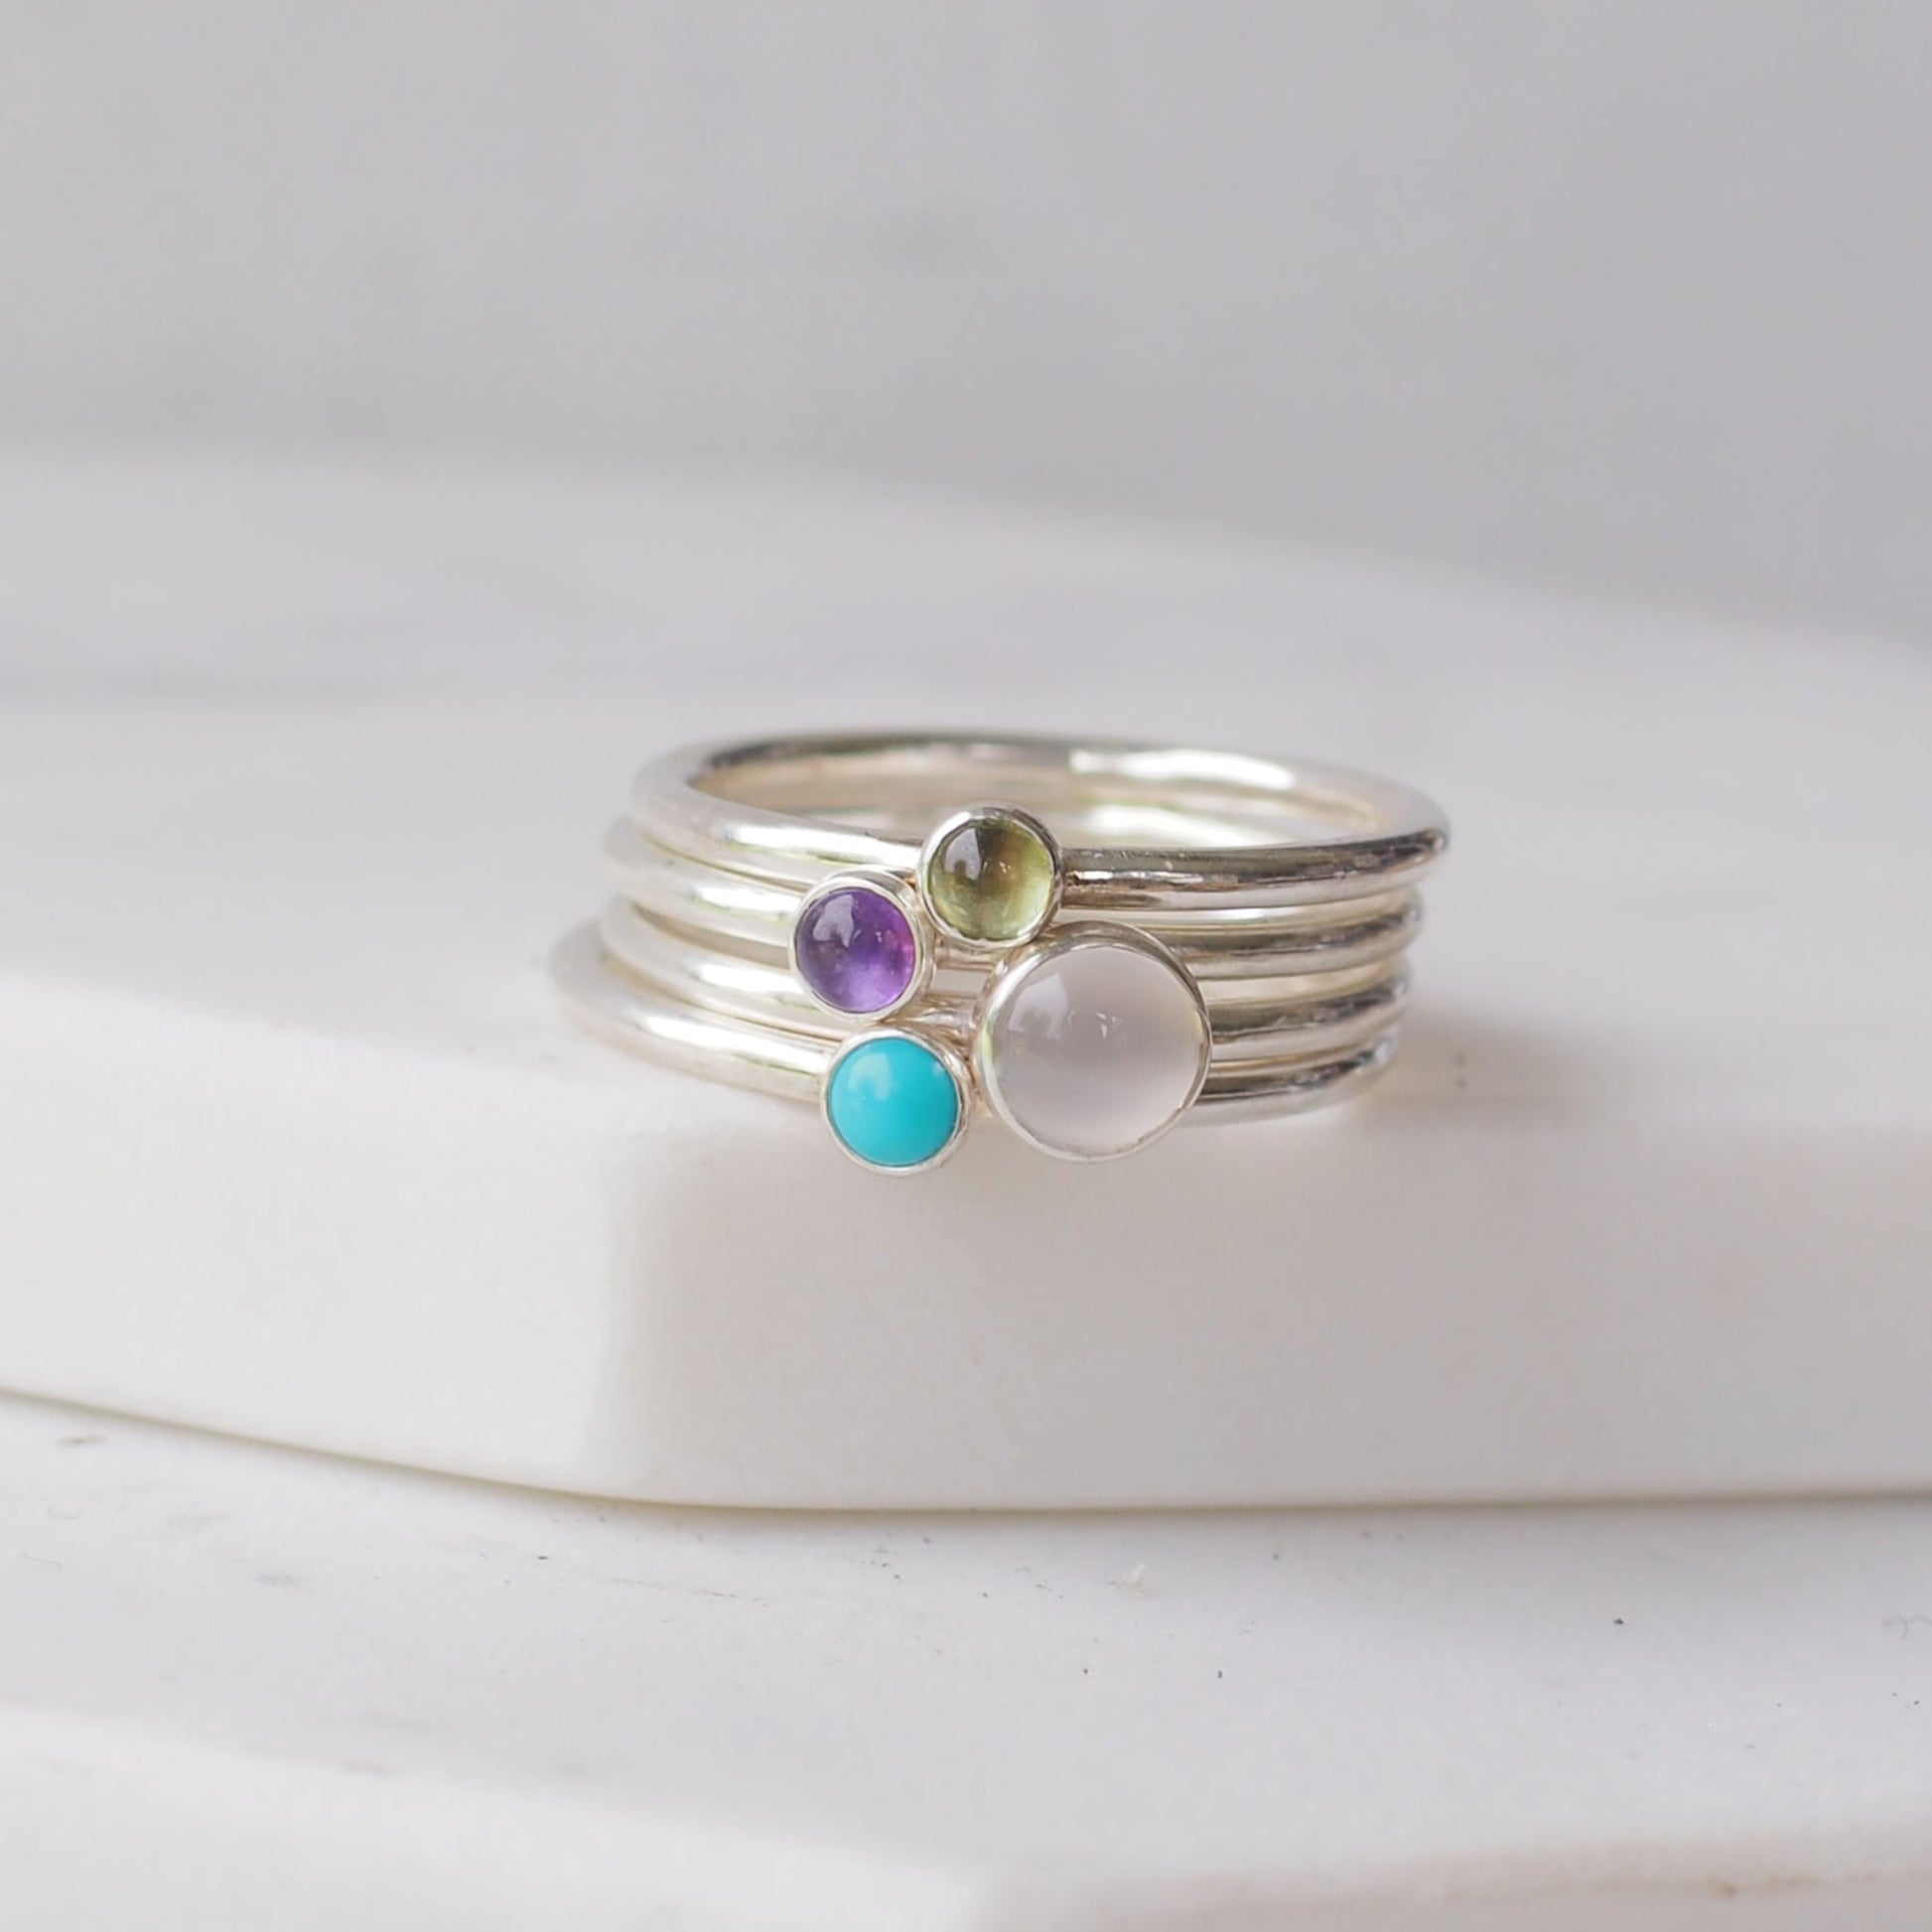 gemstone Birthstone rings in silver, moonstone, turquoise, amethyst and peridot to symbolise June, February, August and December Birthstones. Handmade in Scotland UK by Maram Jewellery